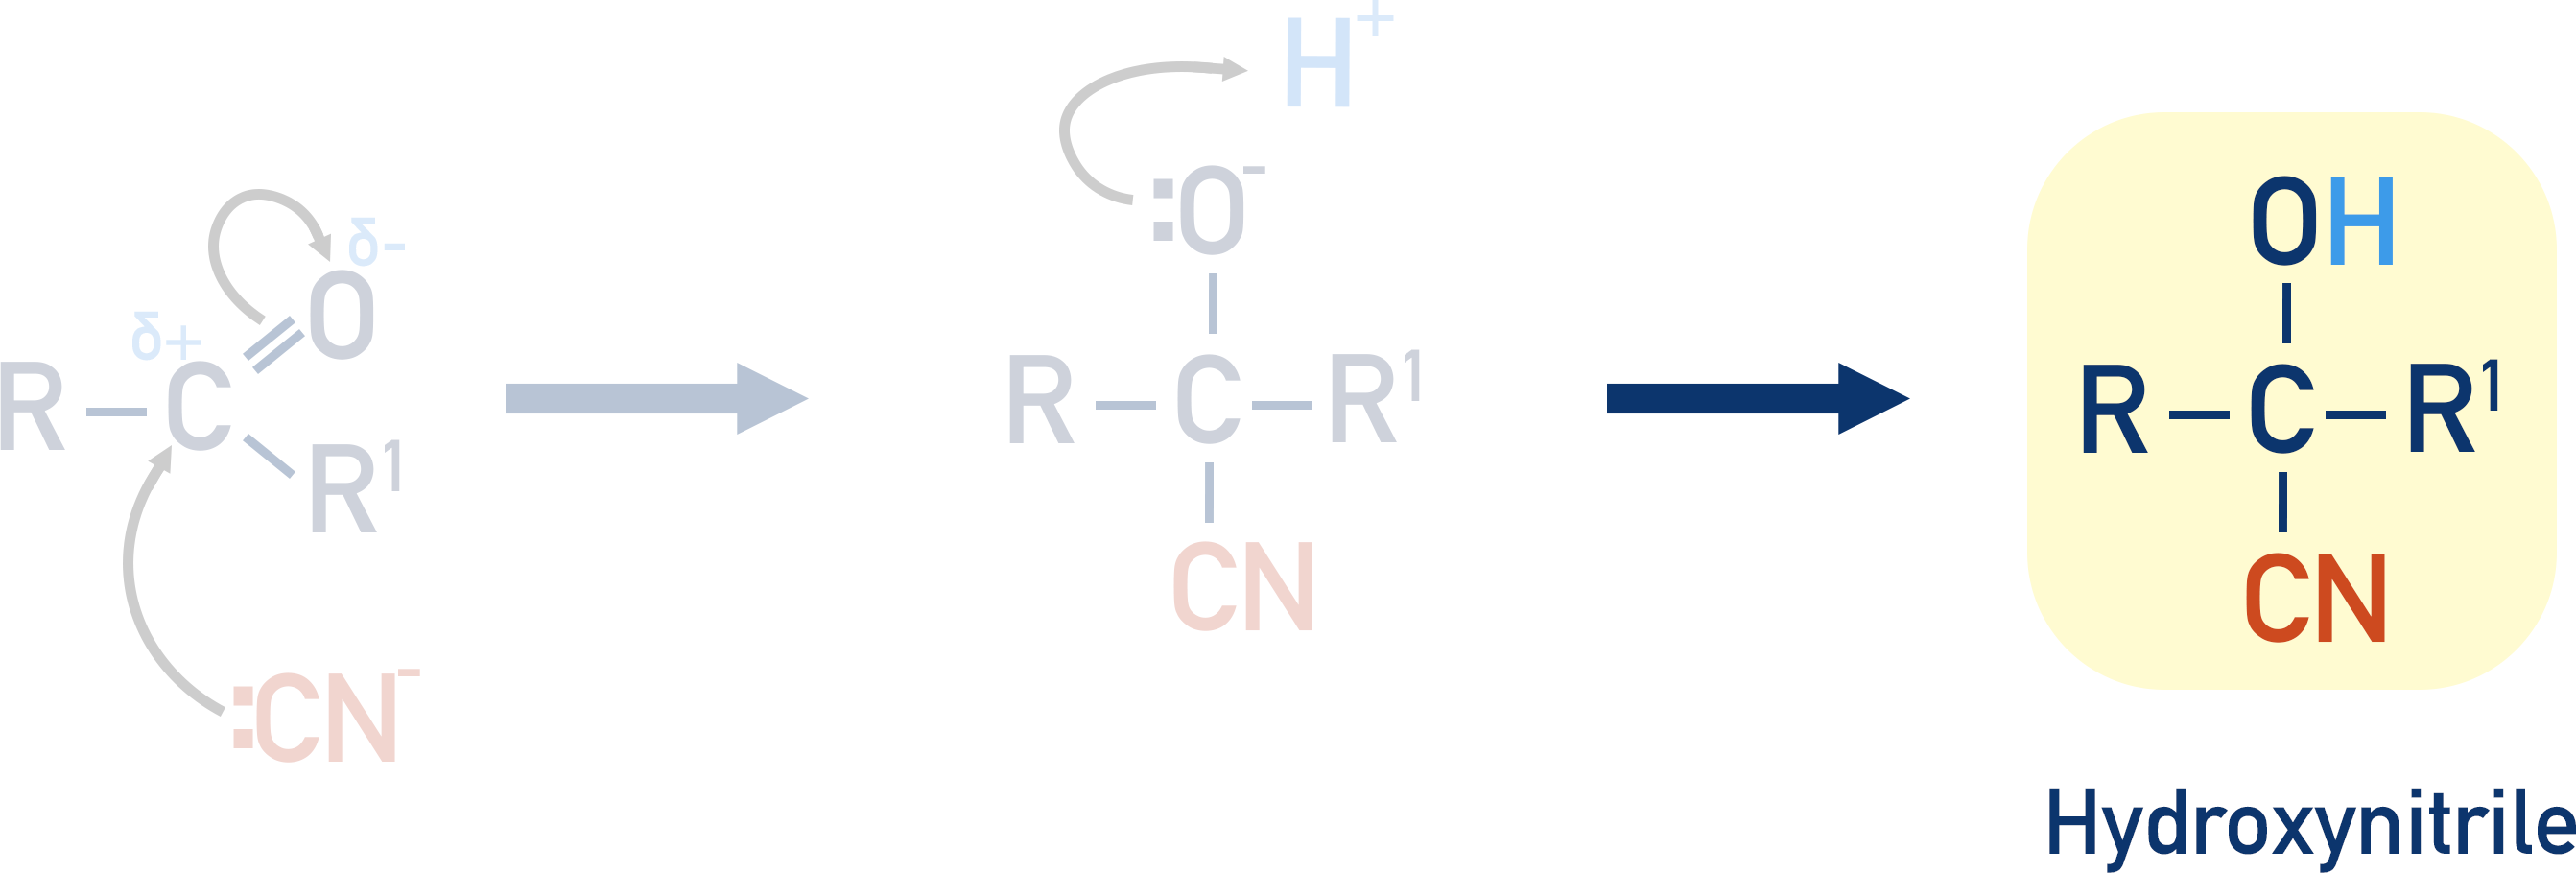 nucleophilic addition of potassium cyanide to carbonyl hydroxynitrile mechanism final step